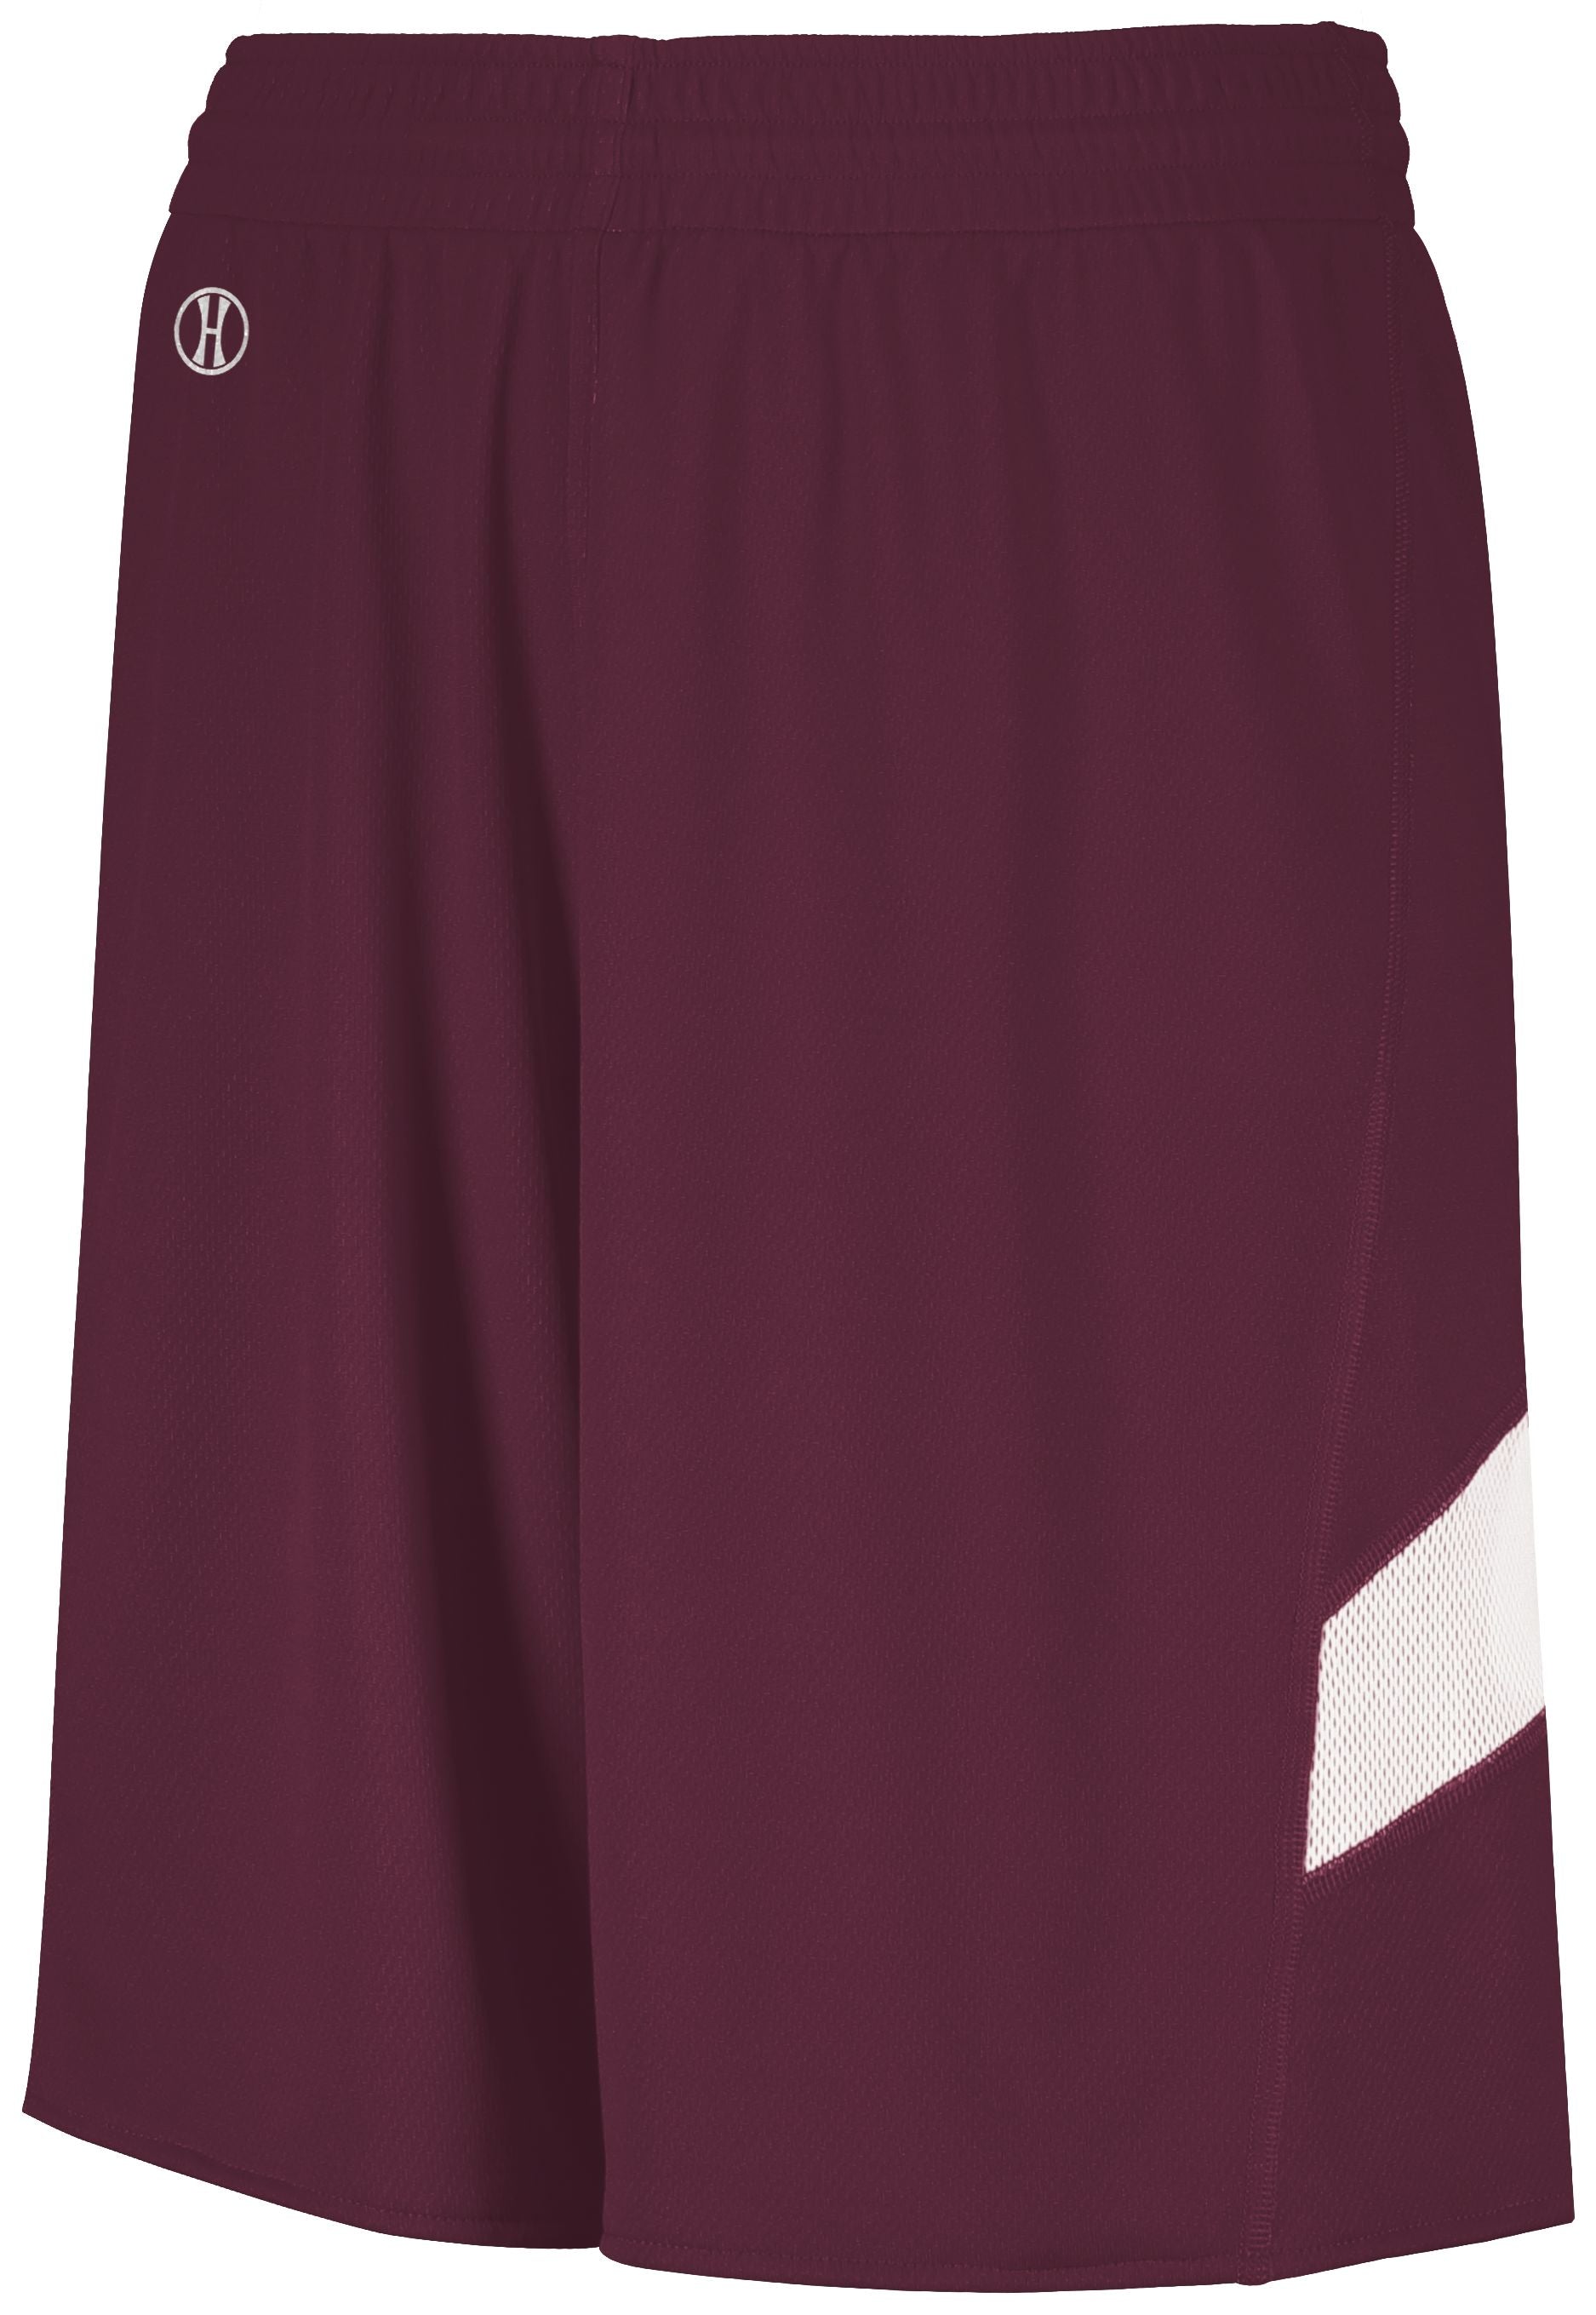 Holloway Dual-Side Single Ply Shorts in Maroon/White  -Part of the Adult, Adult-Shorts, Basketball, Holloway, All-Sports, All-Sports-1 product lines at KanaleyCreations.com